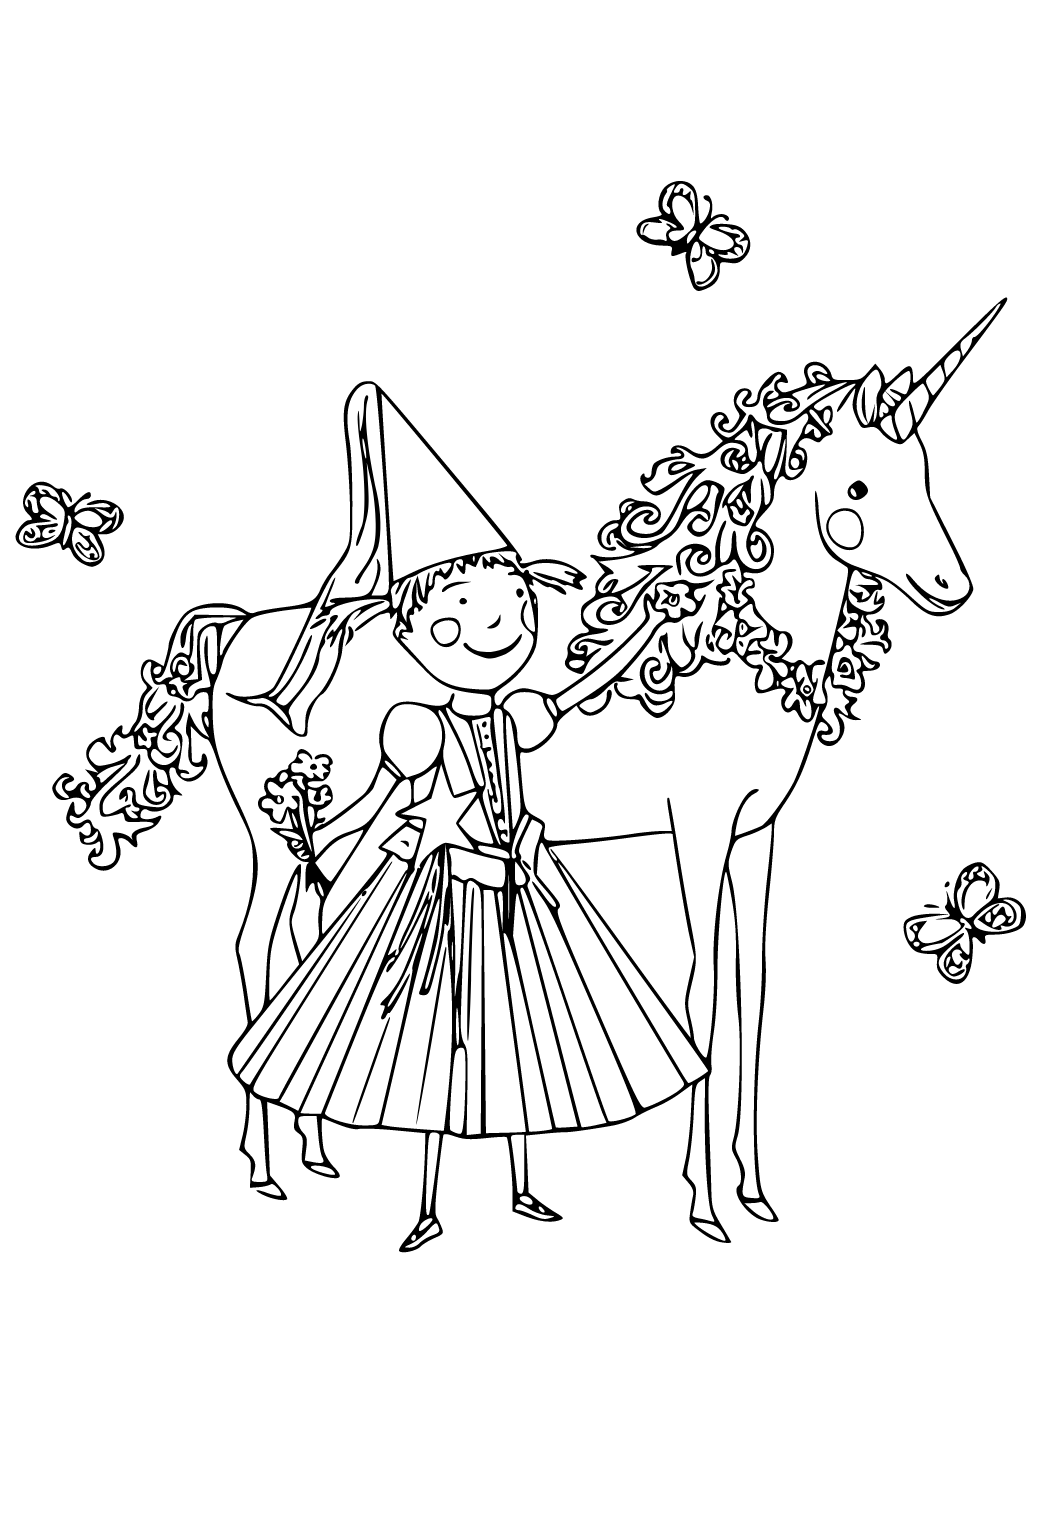 Free printable pinkalicious horse coloring page for adults and kids